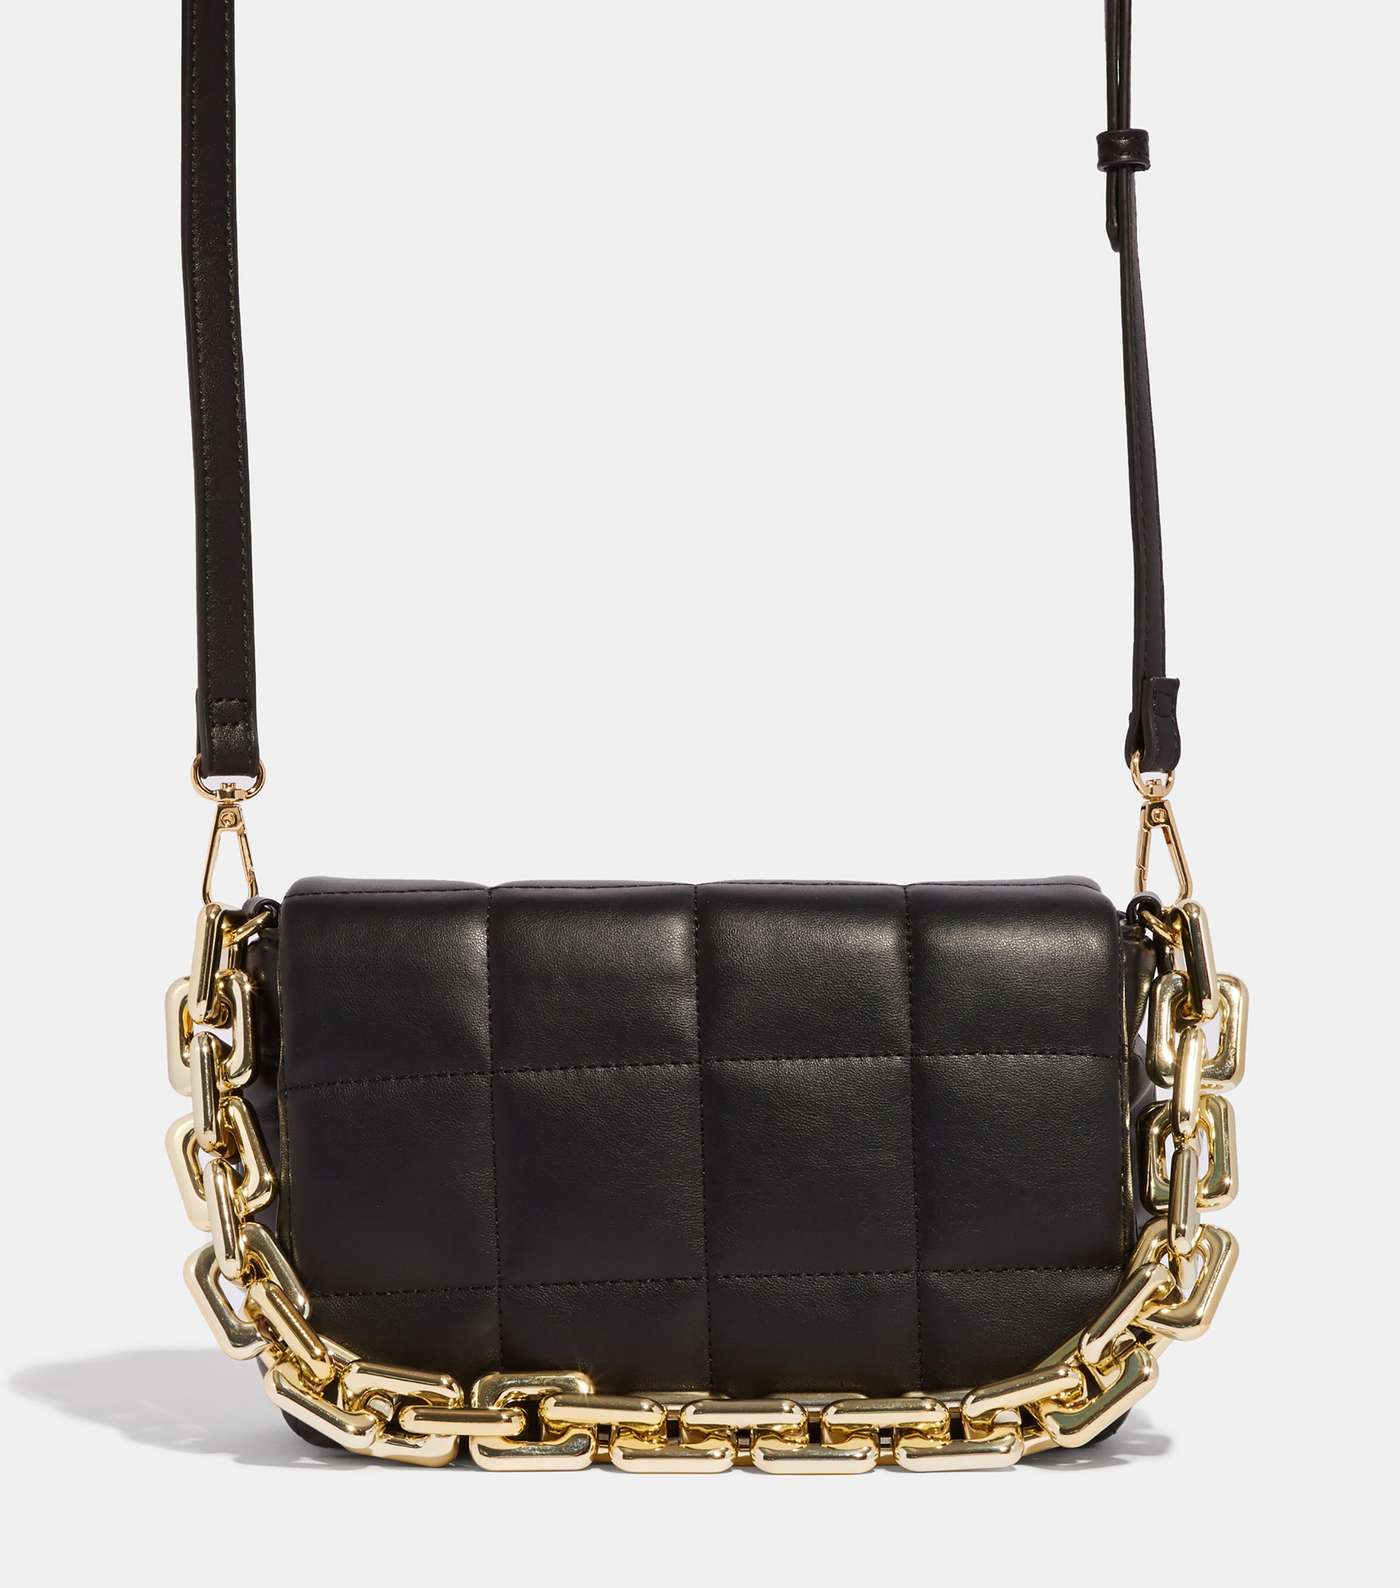 Skinnydip Black Leather-Look Quilted Chain Shoulder Bag Image 4